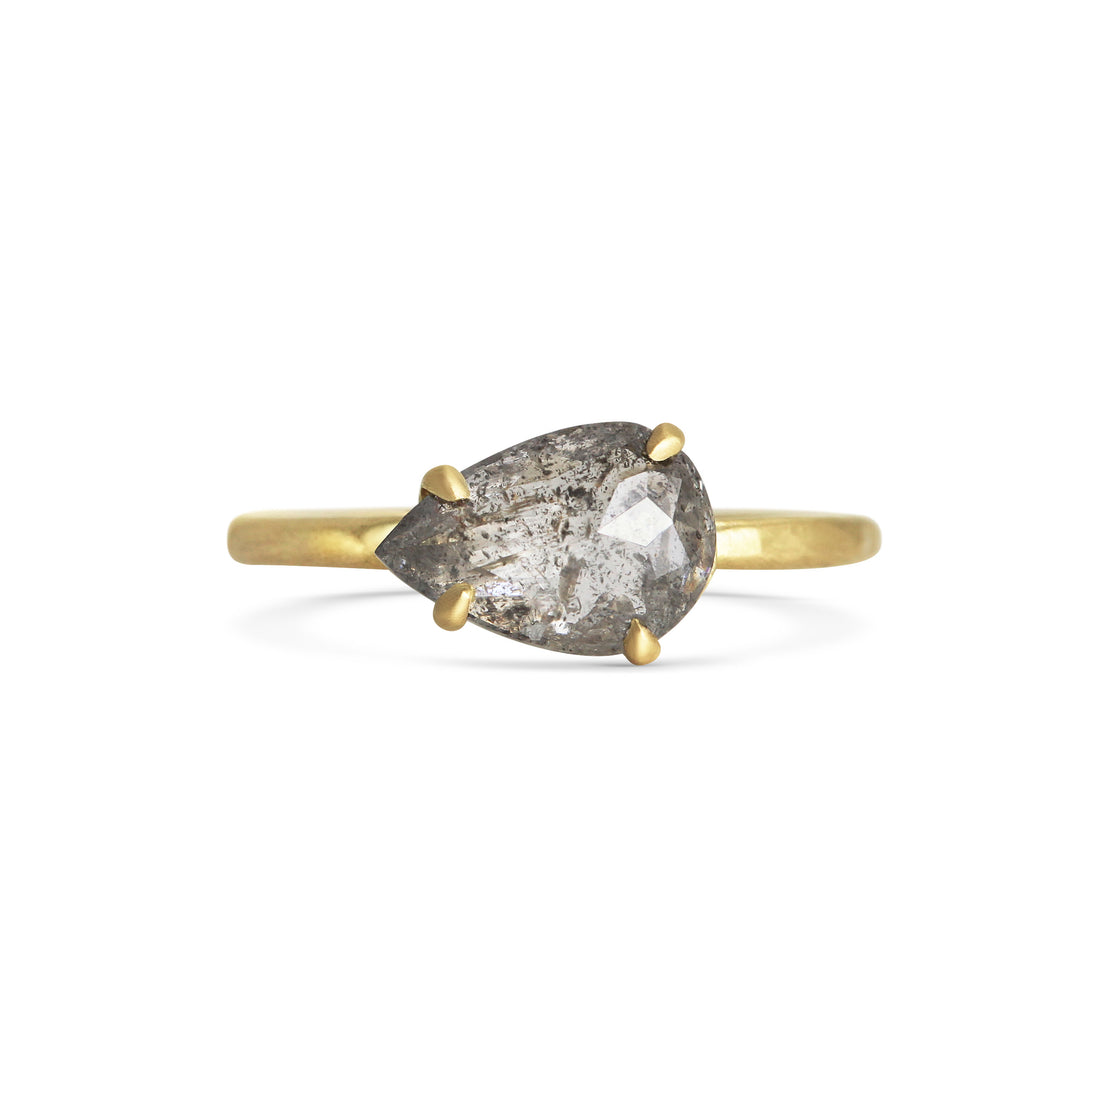  East-to-West Set Pear Cut Diamond Ring by Michelle Oh | The Cut London